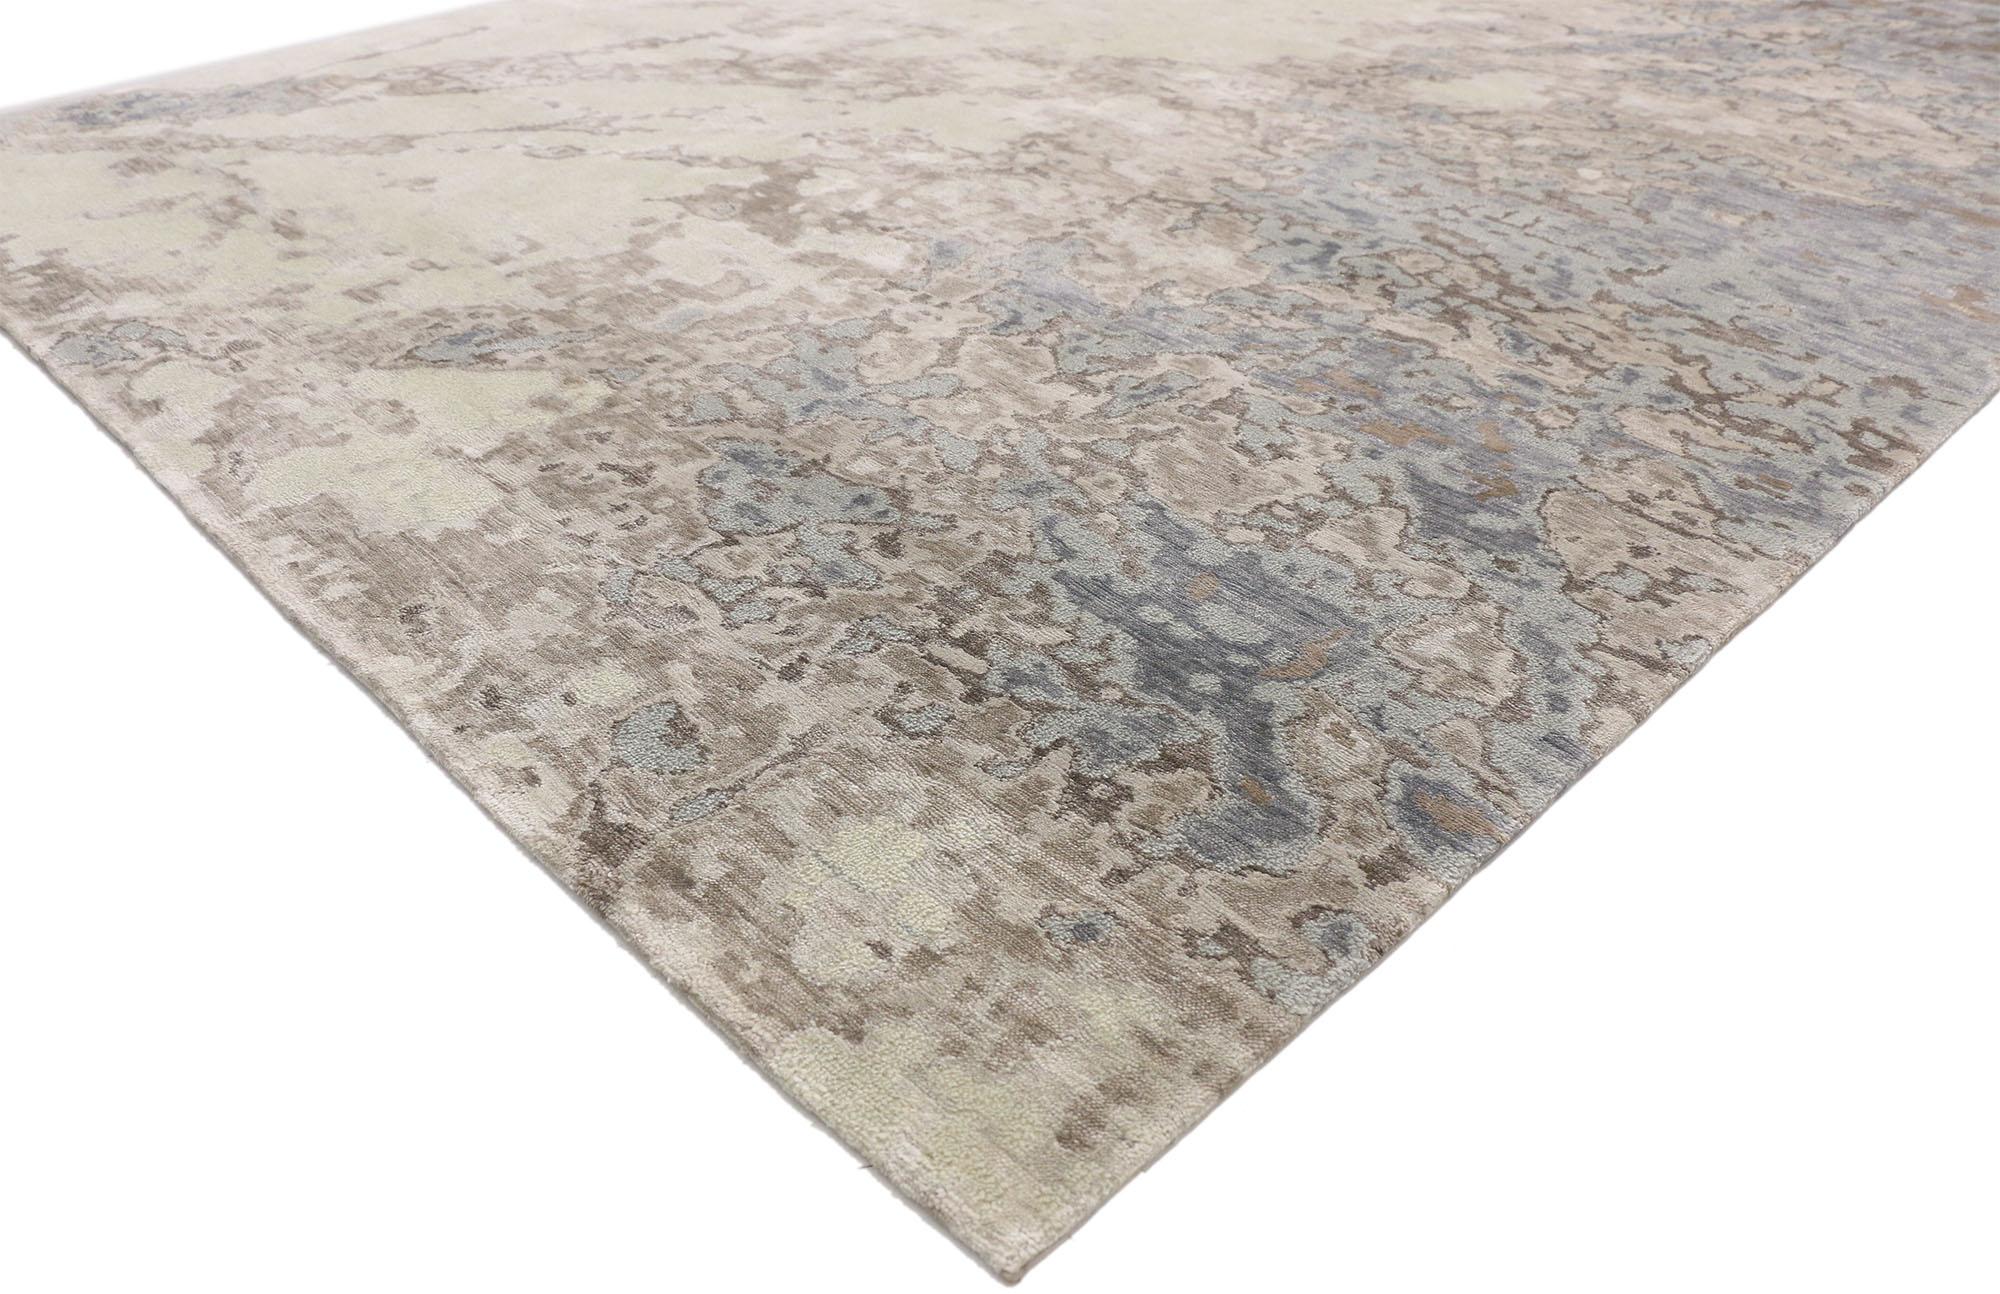 30464, new contemporary rug with expressionist Grunge Art style and neutral colors. This hand knotted wool new contemporary rug with grunge art style and neutral colors is the epitome of relaxed luxury. Reflecting elements of rough hewn Grunge Art